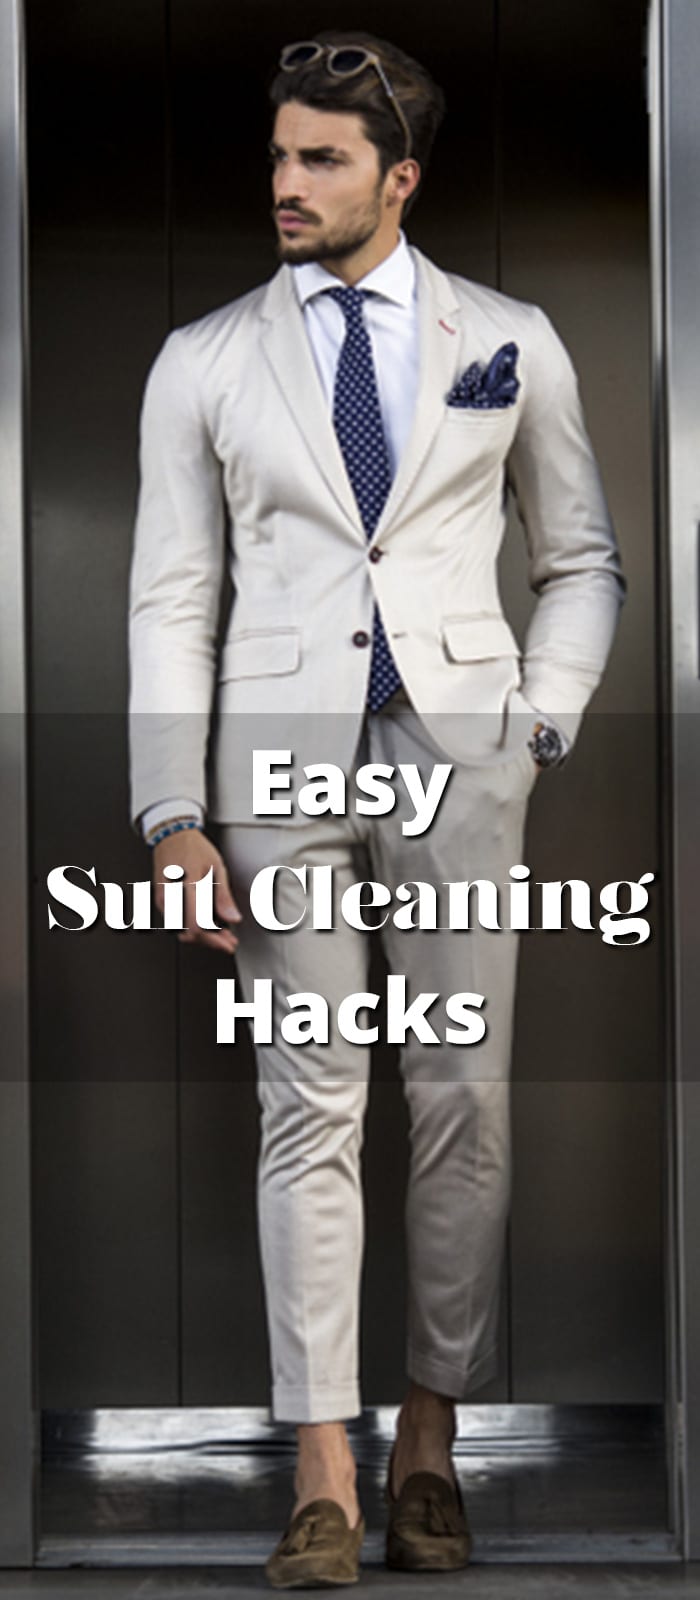 Easy Suit Cleaning Hacks